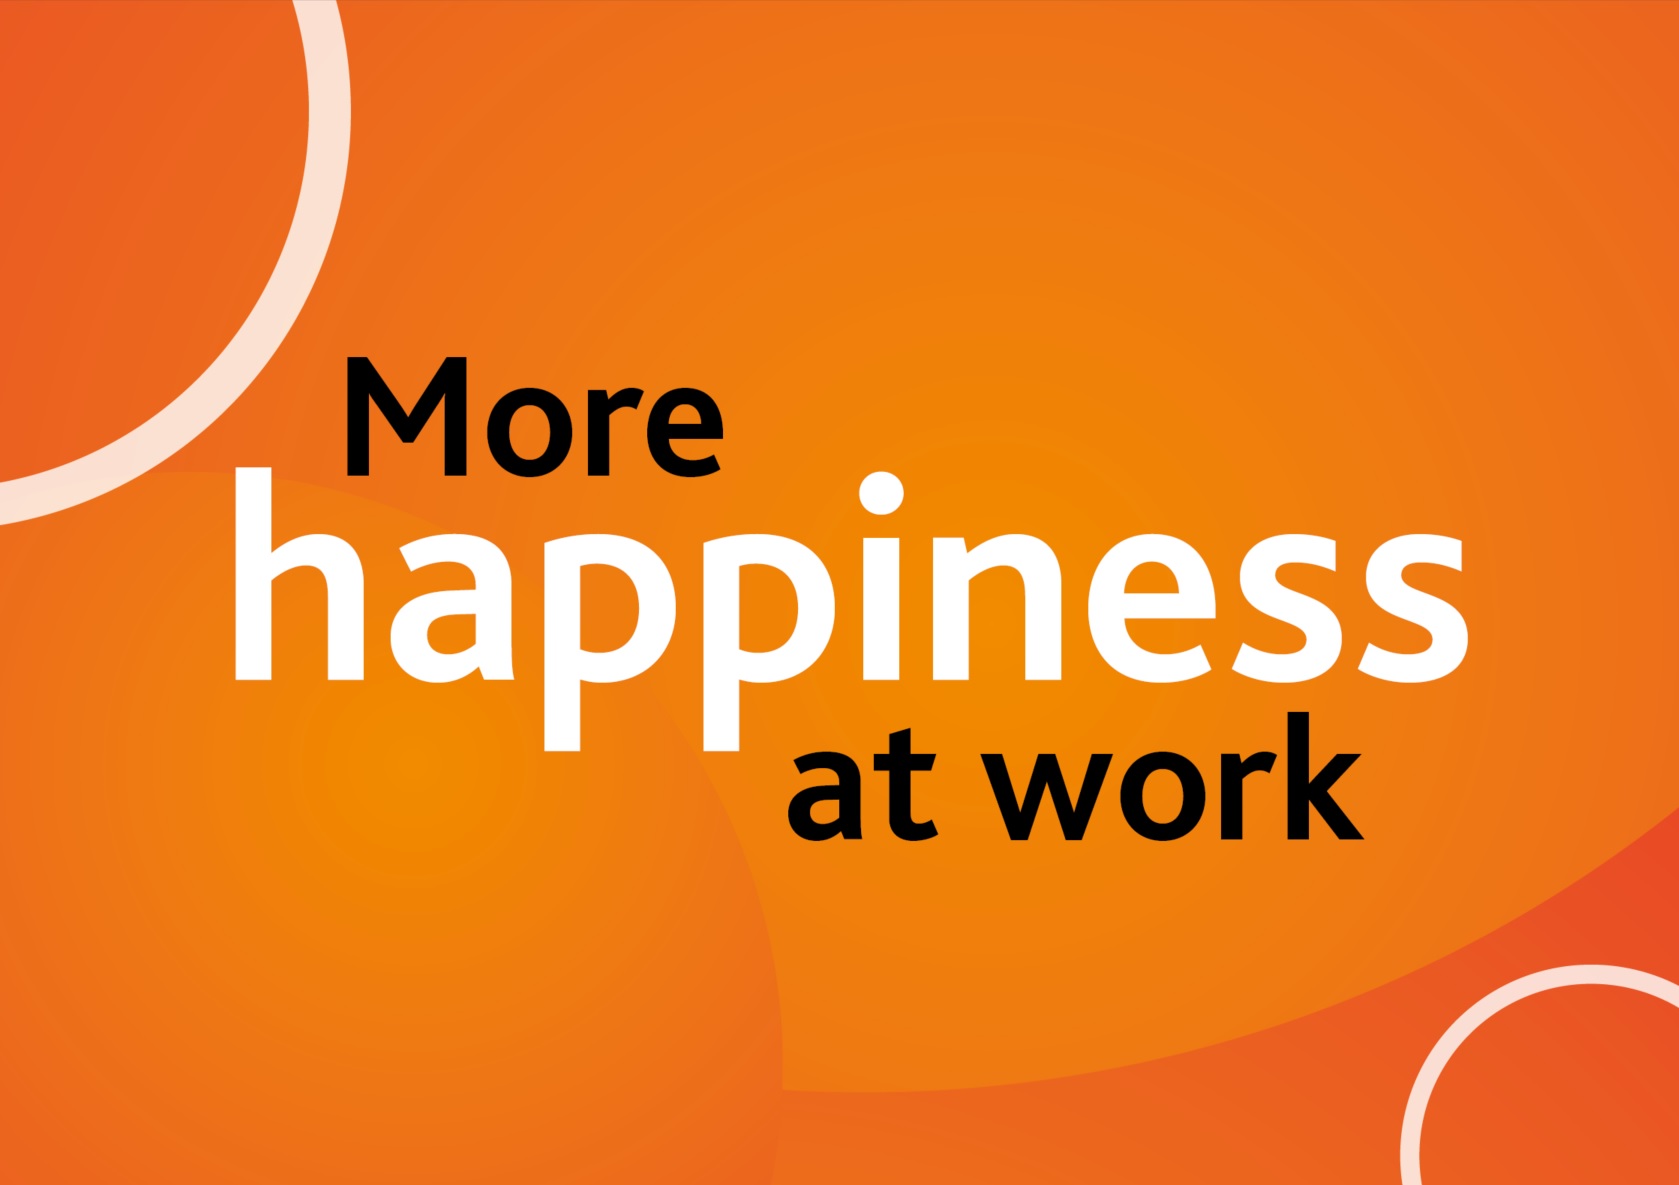 More happiness at work